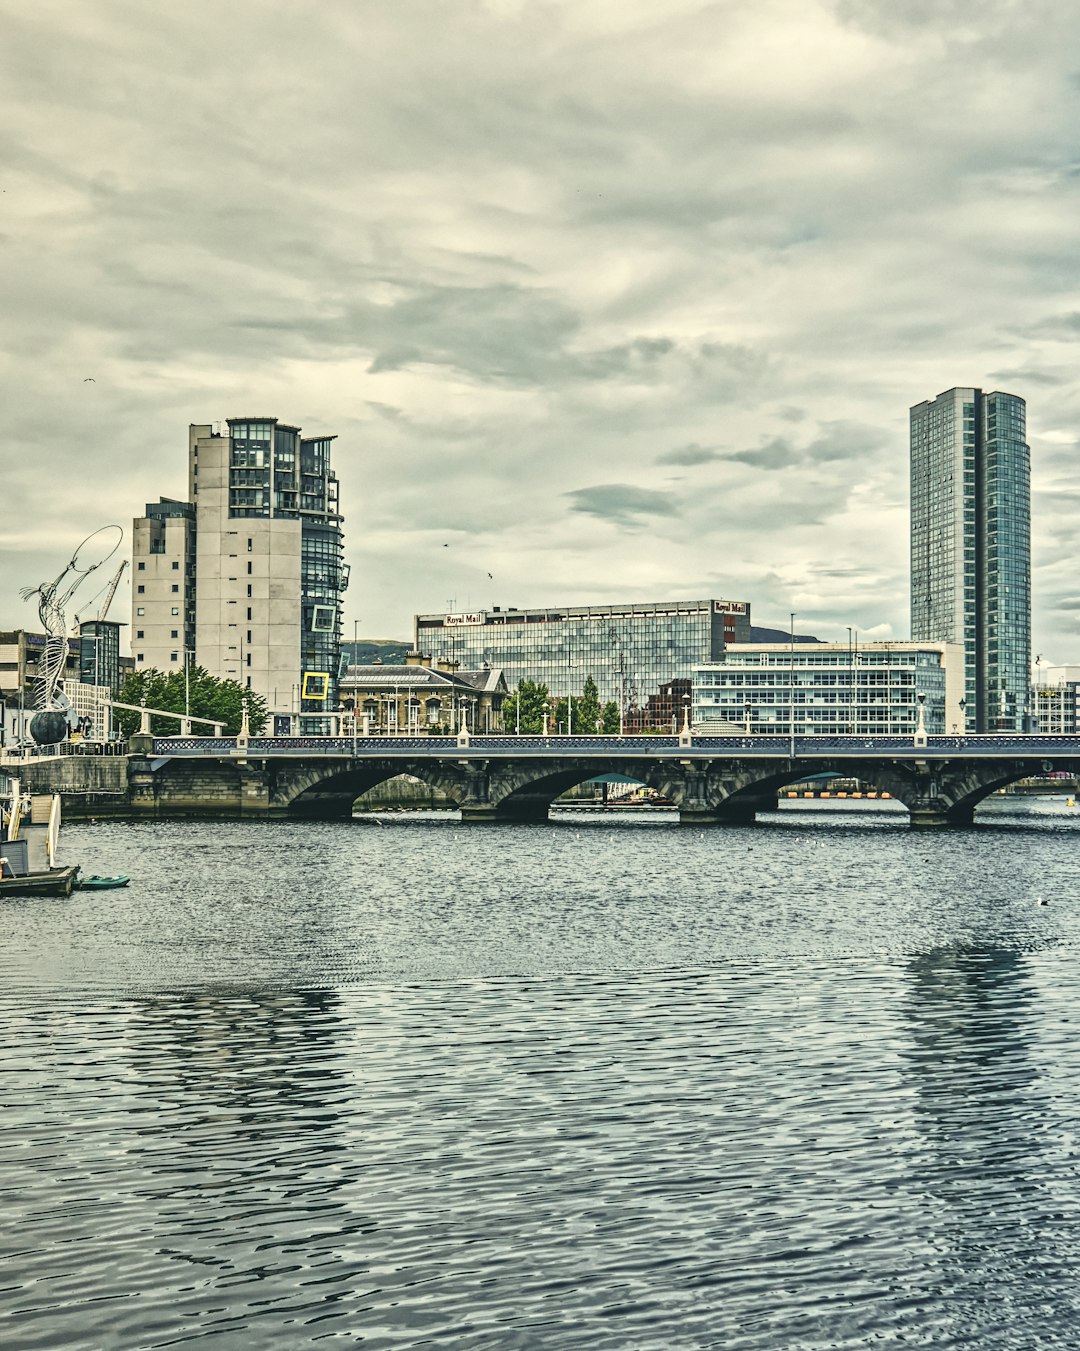 Looking down the River Lagan toward Queens Bridge; featuring, from left to right, Beacon of Hope Statue, the Ships Building, Custom House, Royal Mail Building, and the Obel Building in the Cathedral Quarter (Jul., 2020).